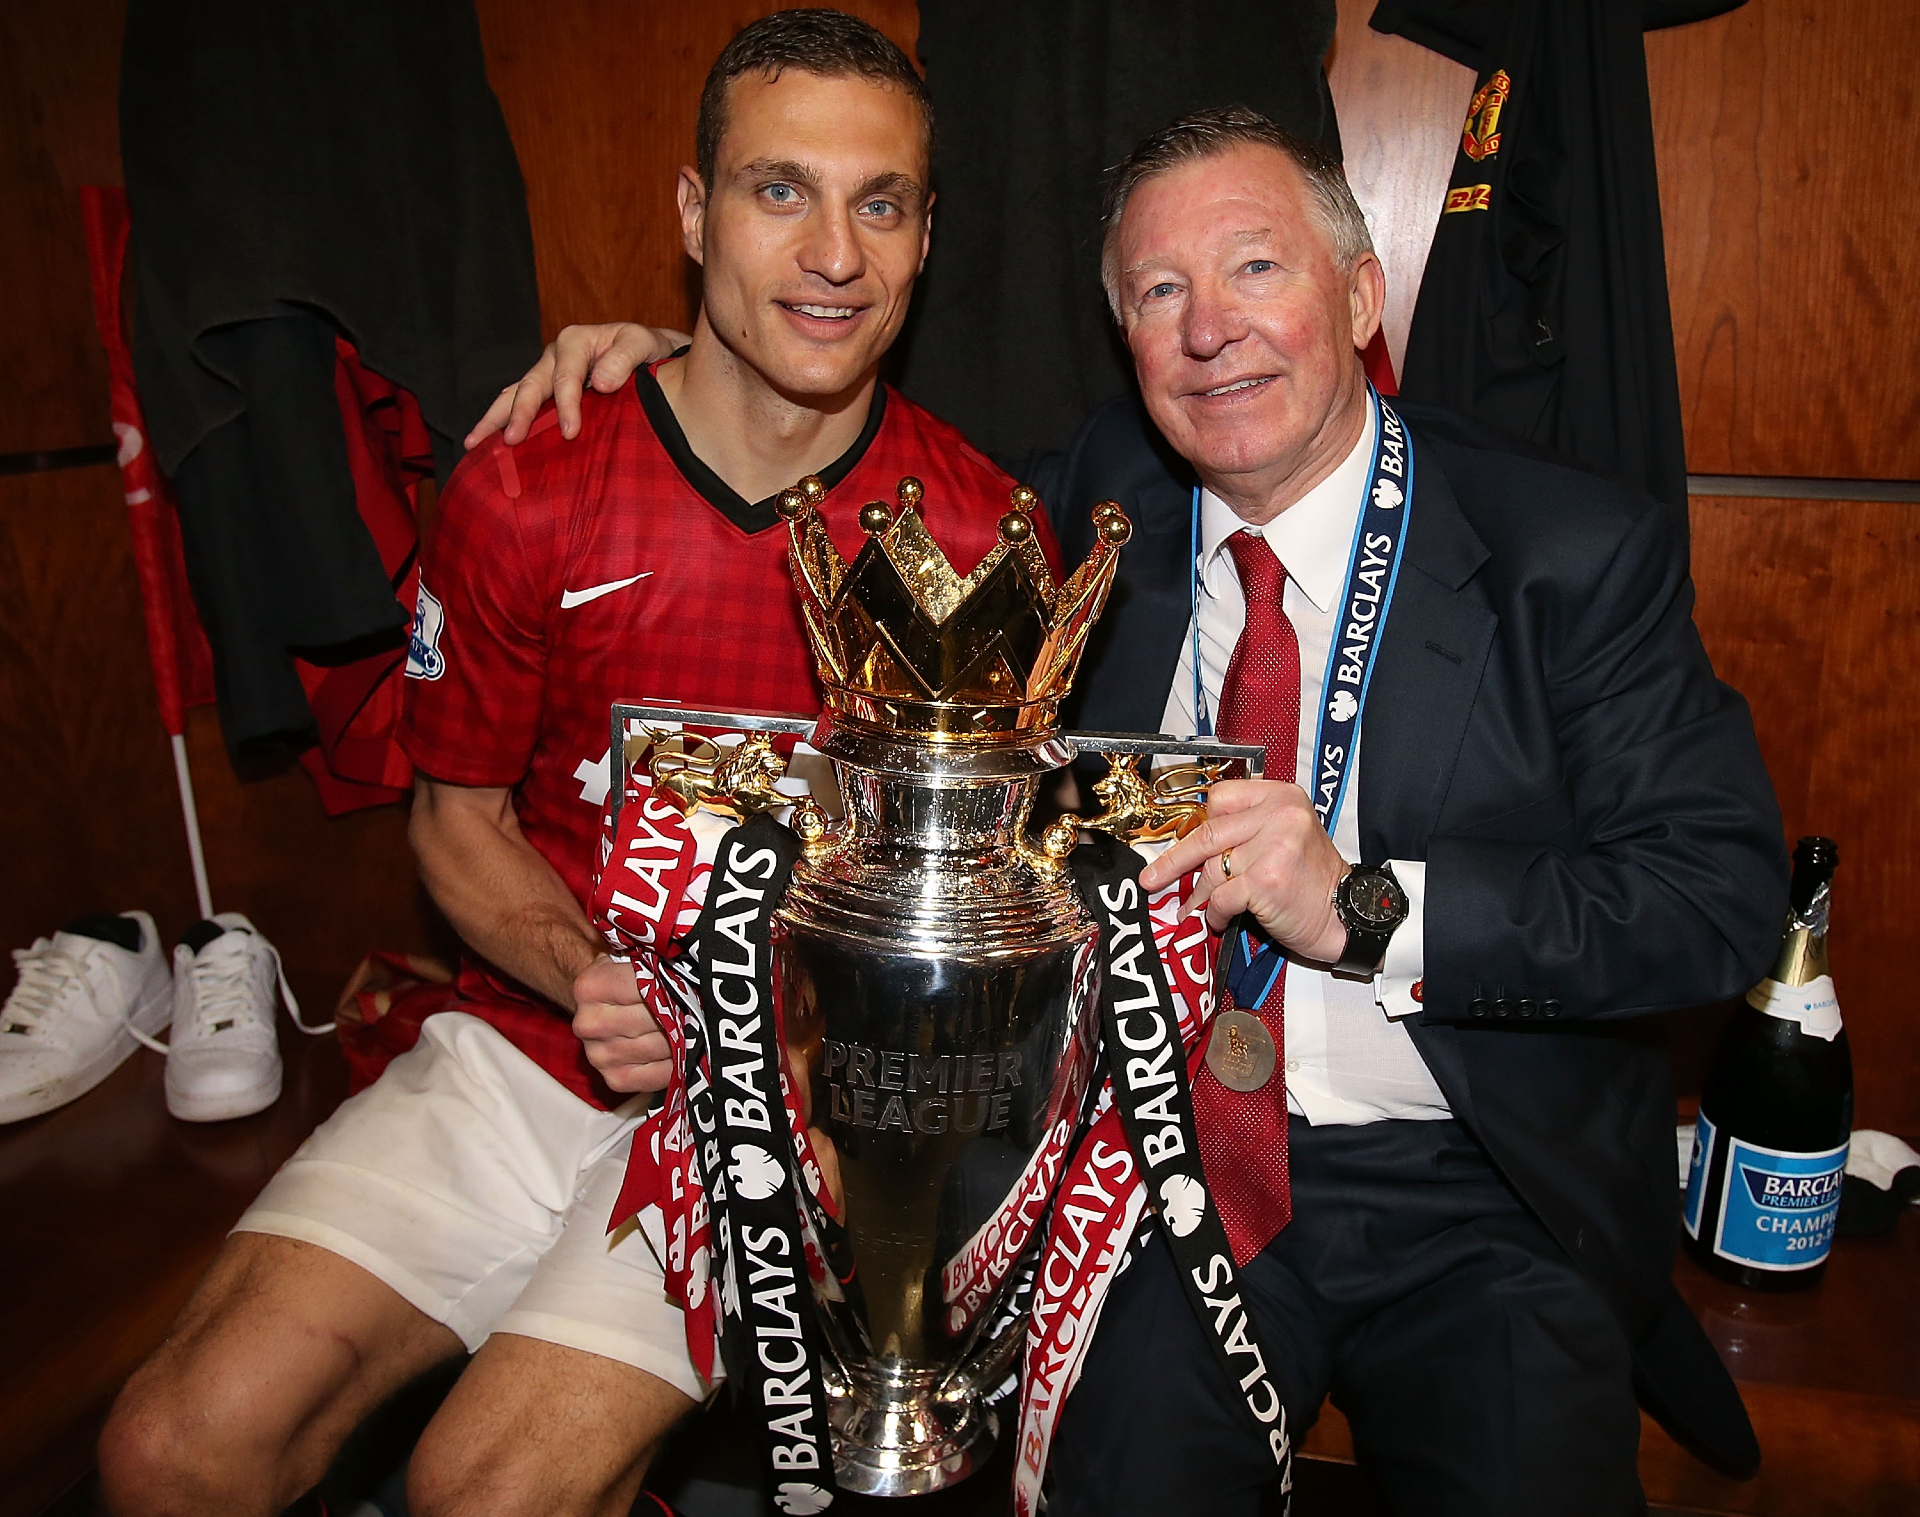 man uniteds nemanja vidic and alex ferguson pose with the pairs final premier league trophy in | Top 20 January transfers in Premier League history | The Paradise News